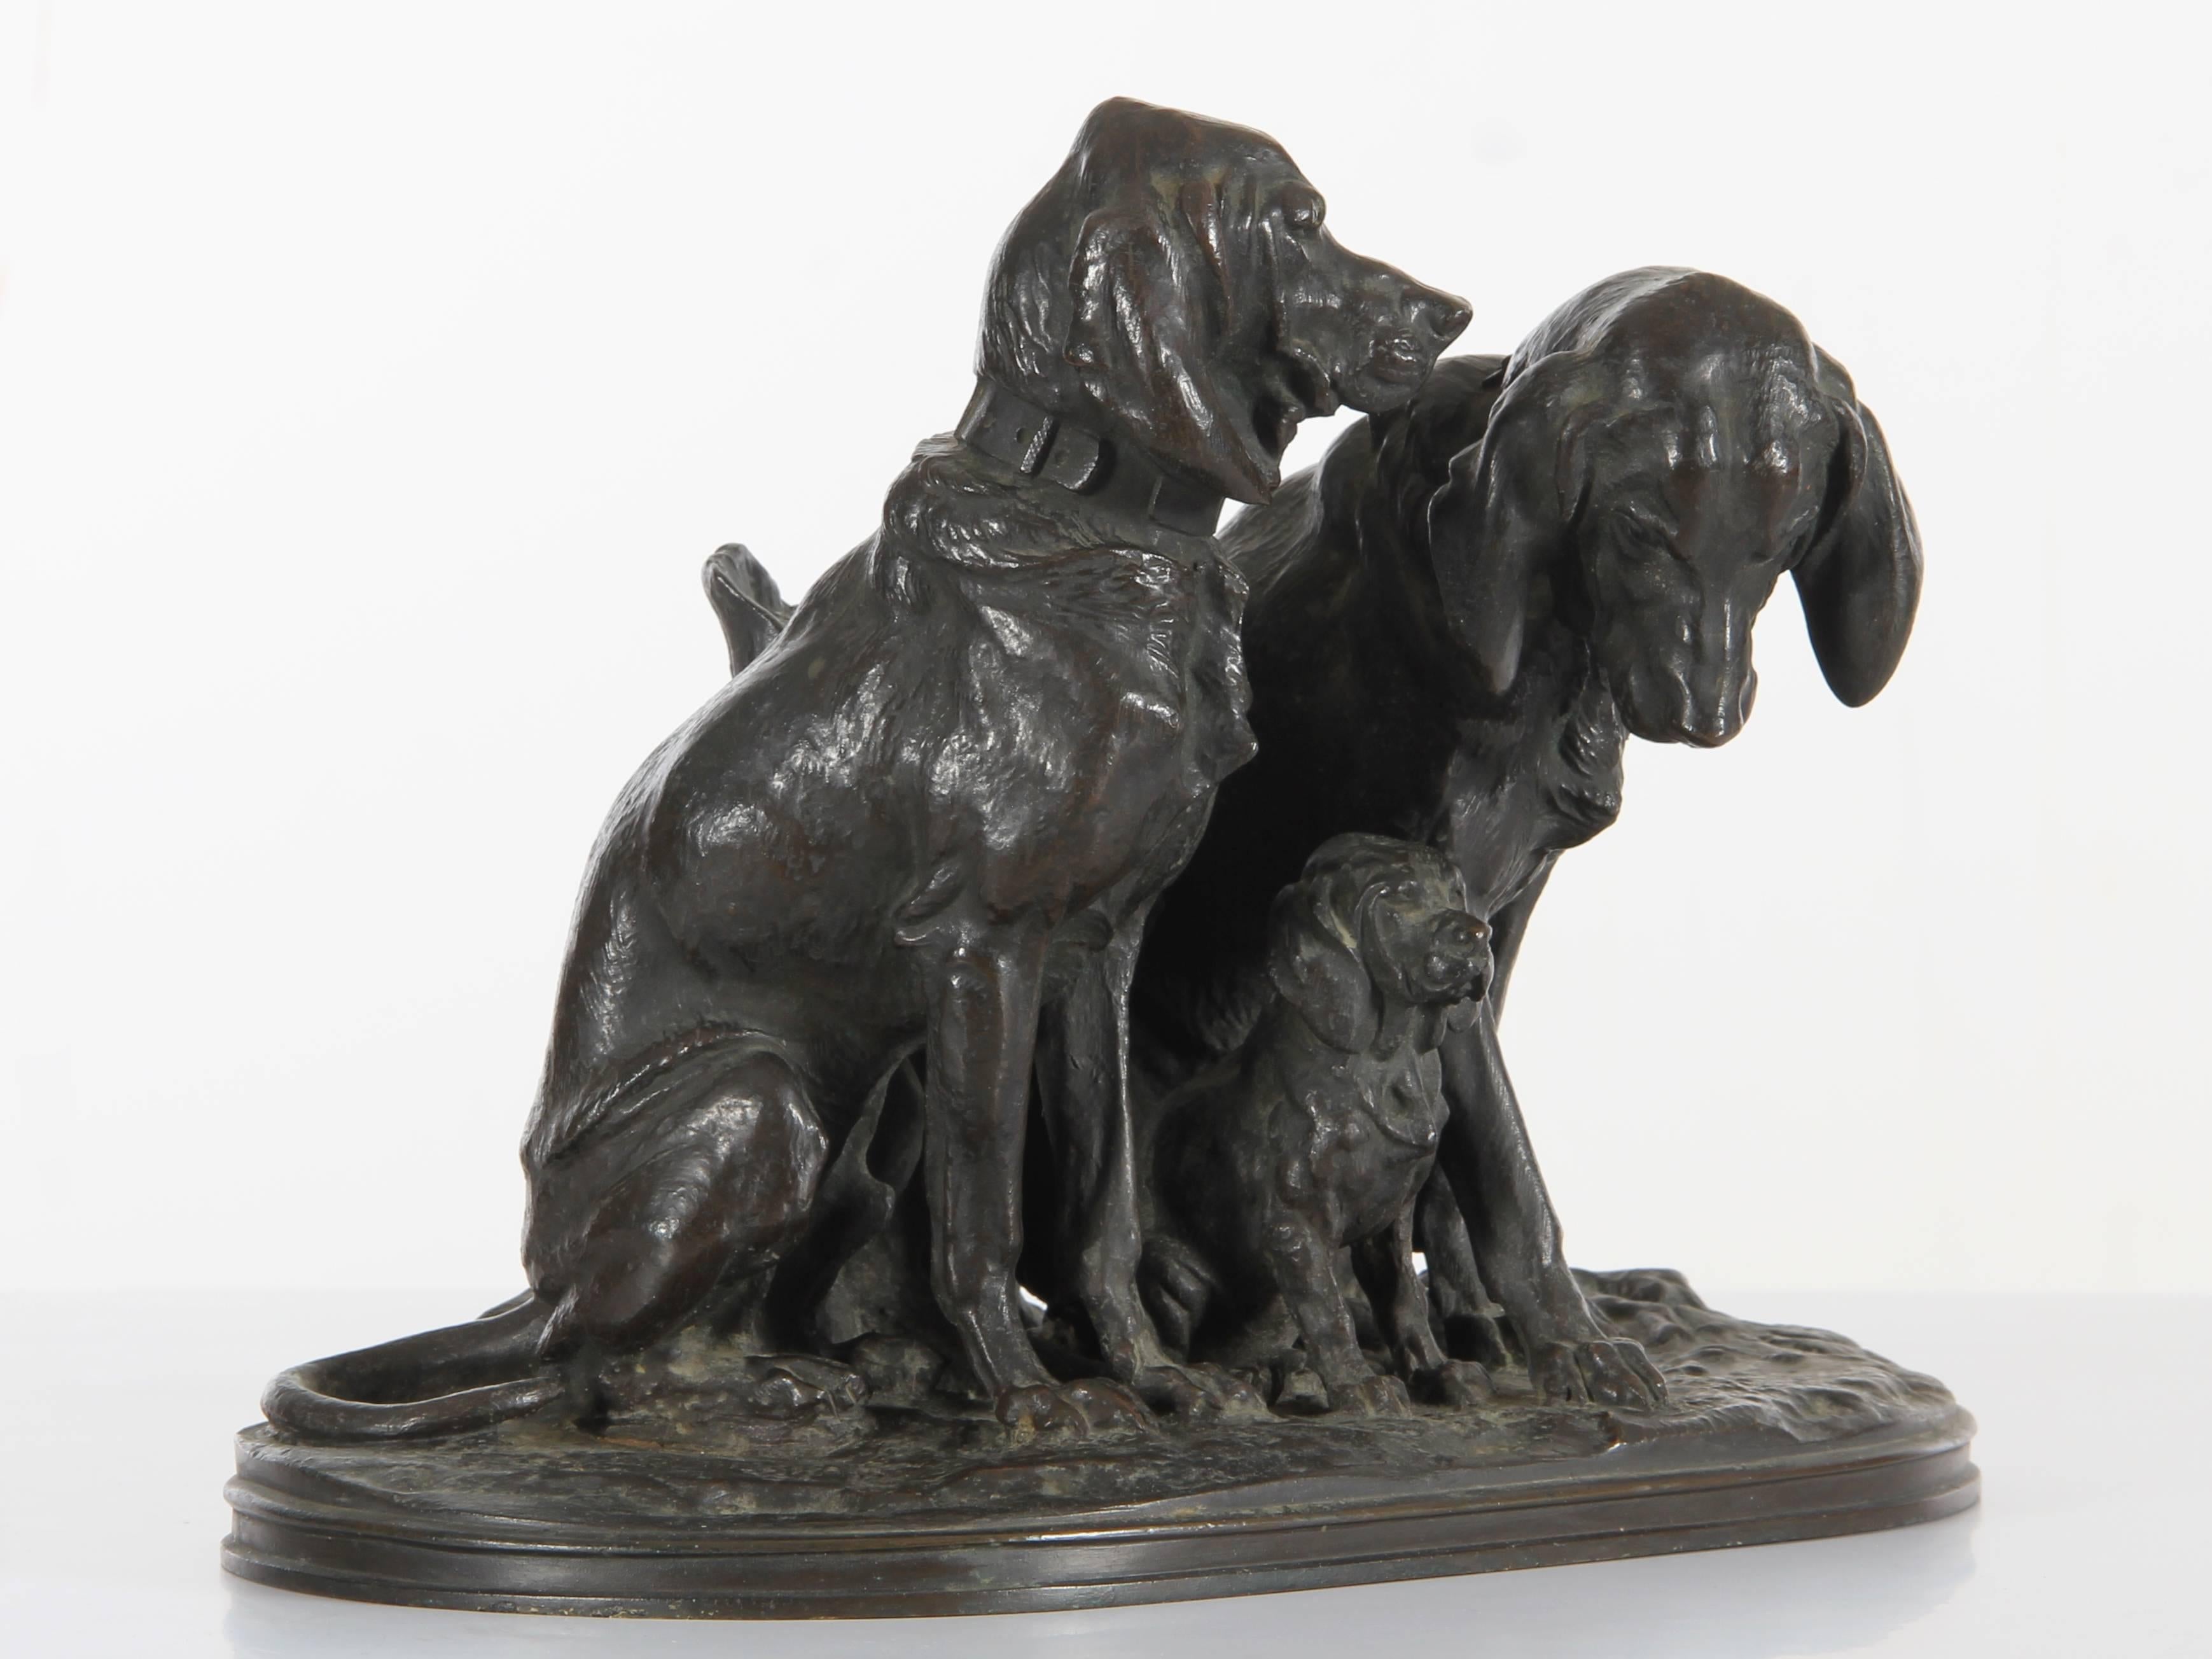 Alfred Jacquemart (French, 1824-1896) bronze figural group of three hunting pointers dogs, including a puppy, seated by a tree stump, on a naturalistic base of grass, leaves and roots. Original brown patina. Signed A Jacquemart on base.